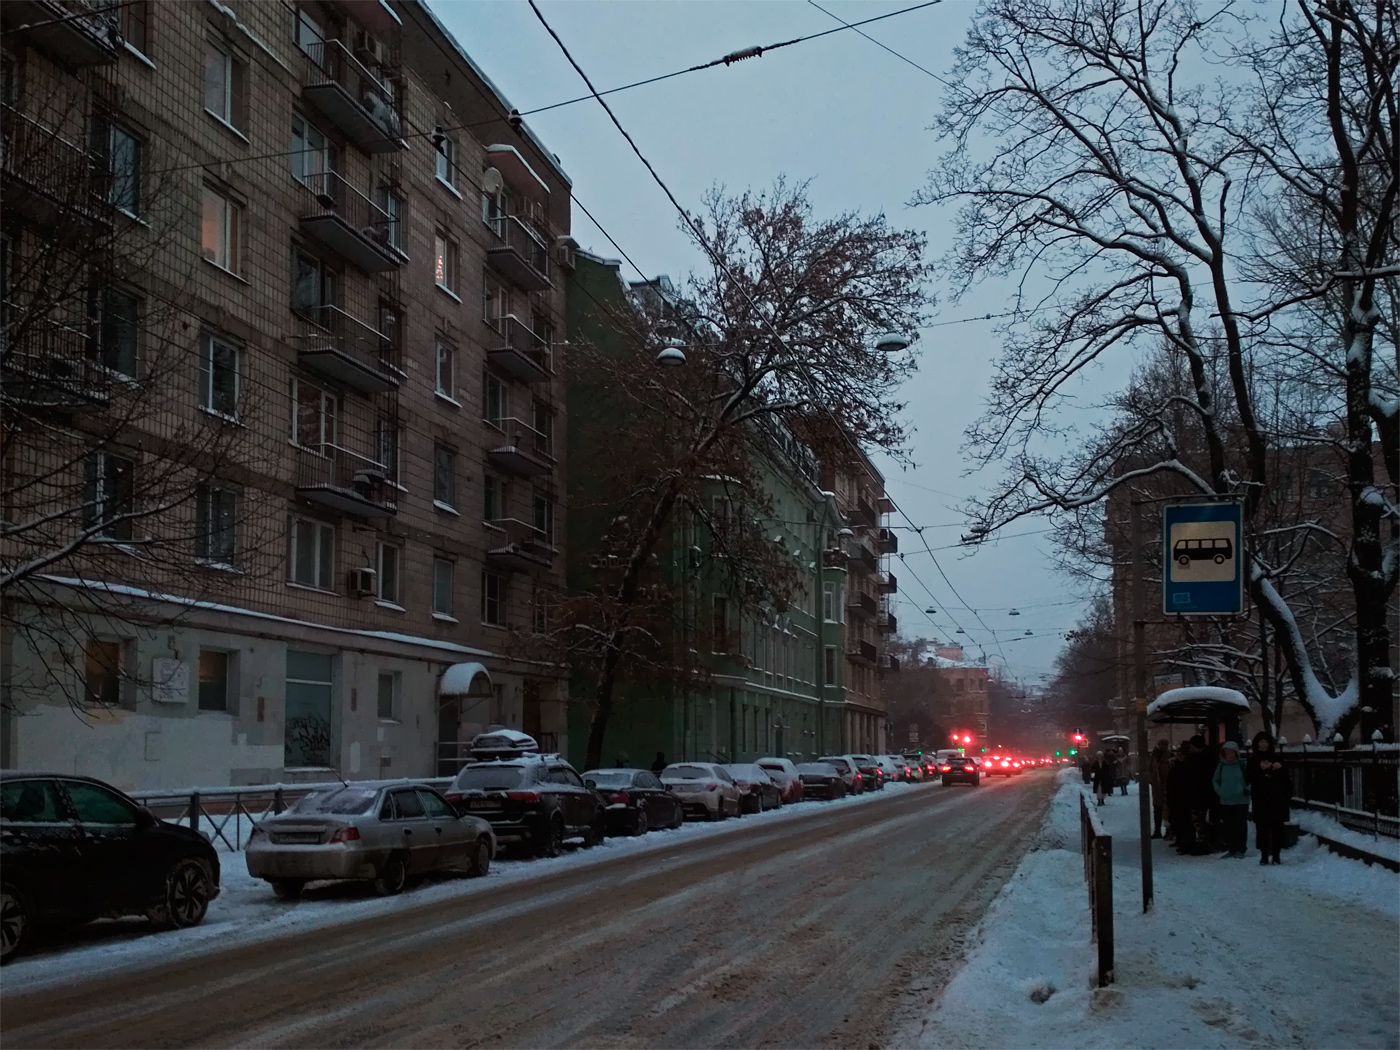 Saint-Petersburg — Trolleybus lines and infrastructure